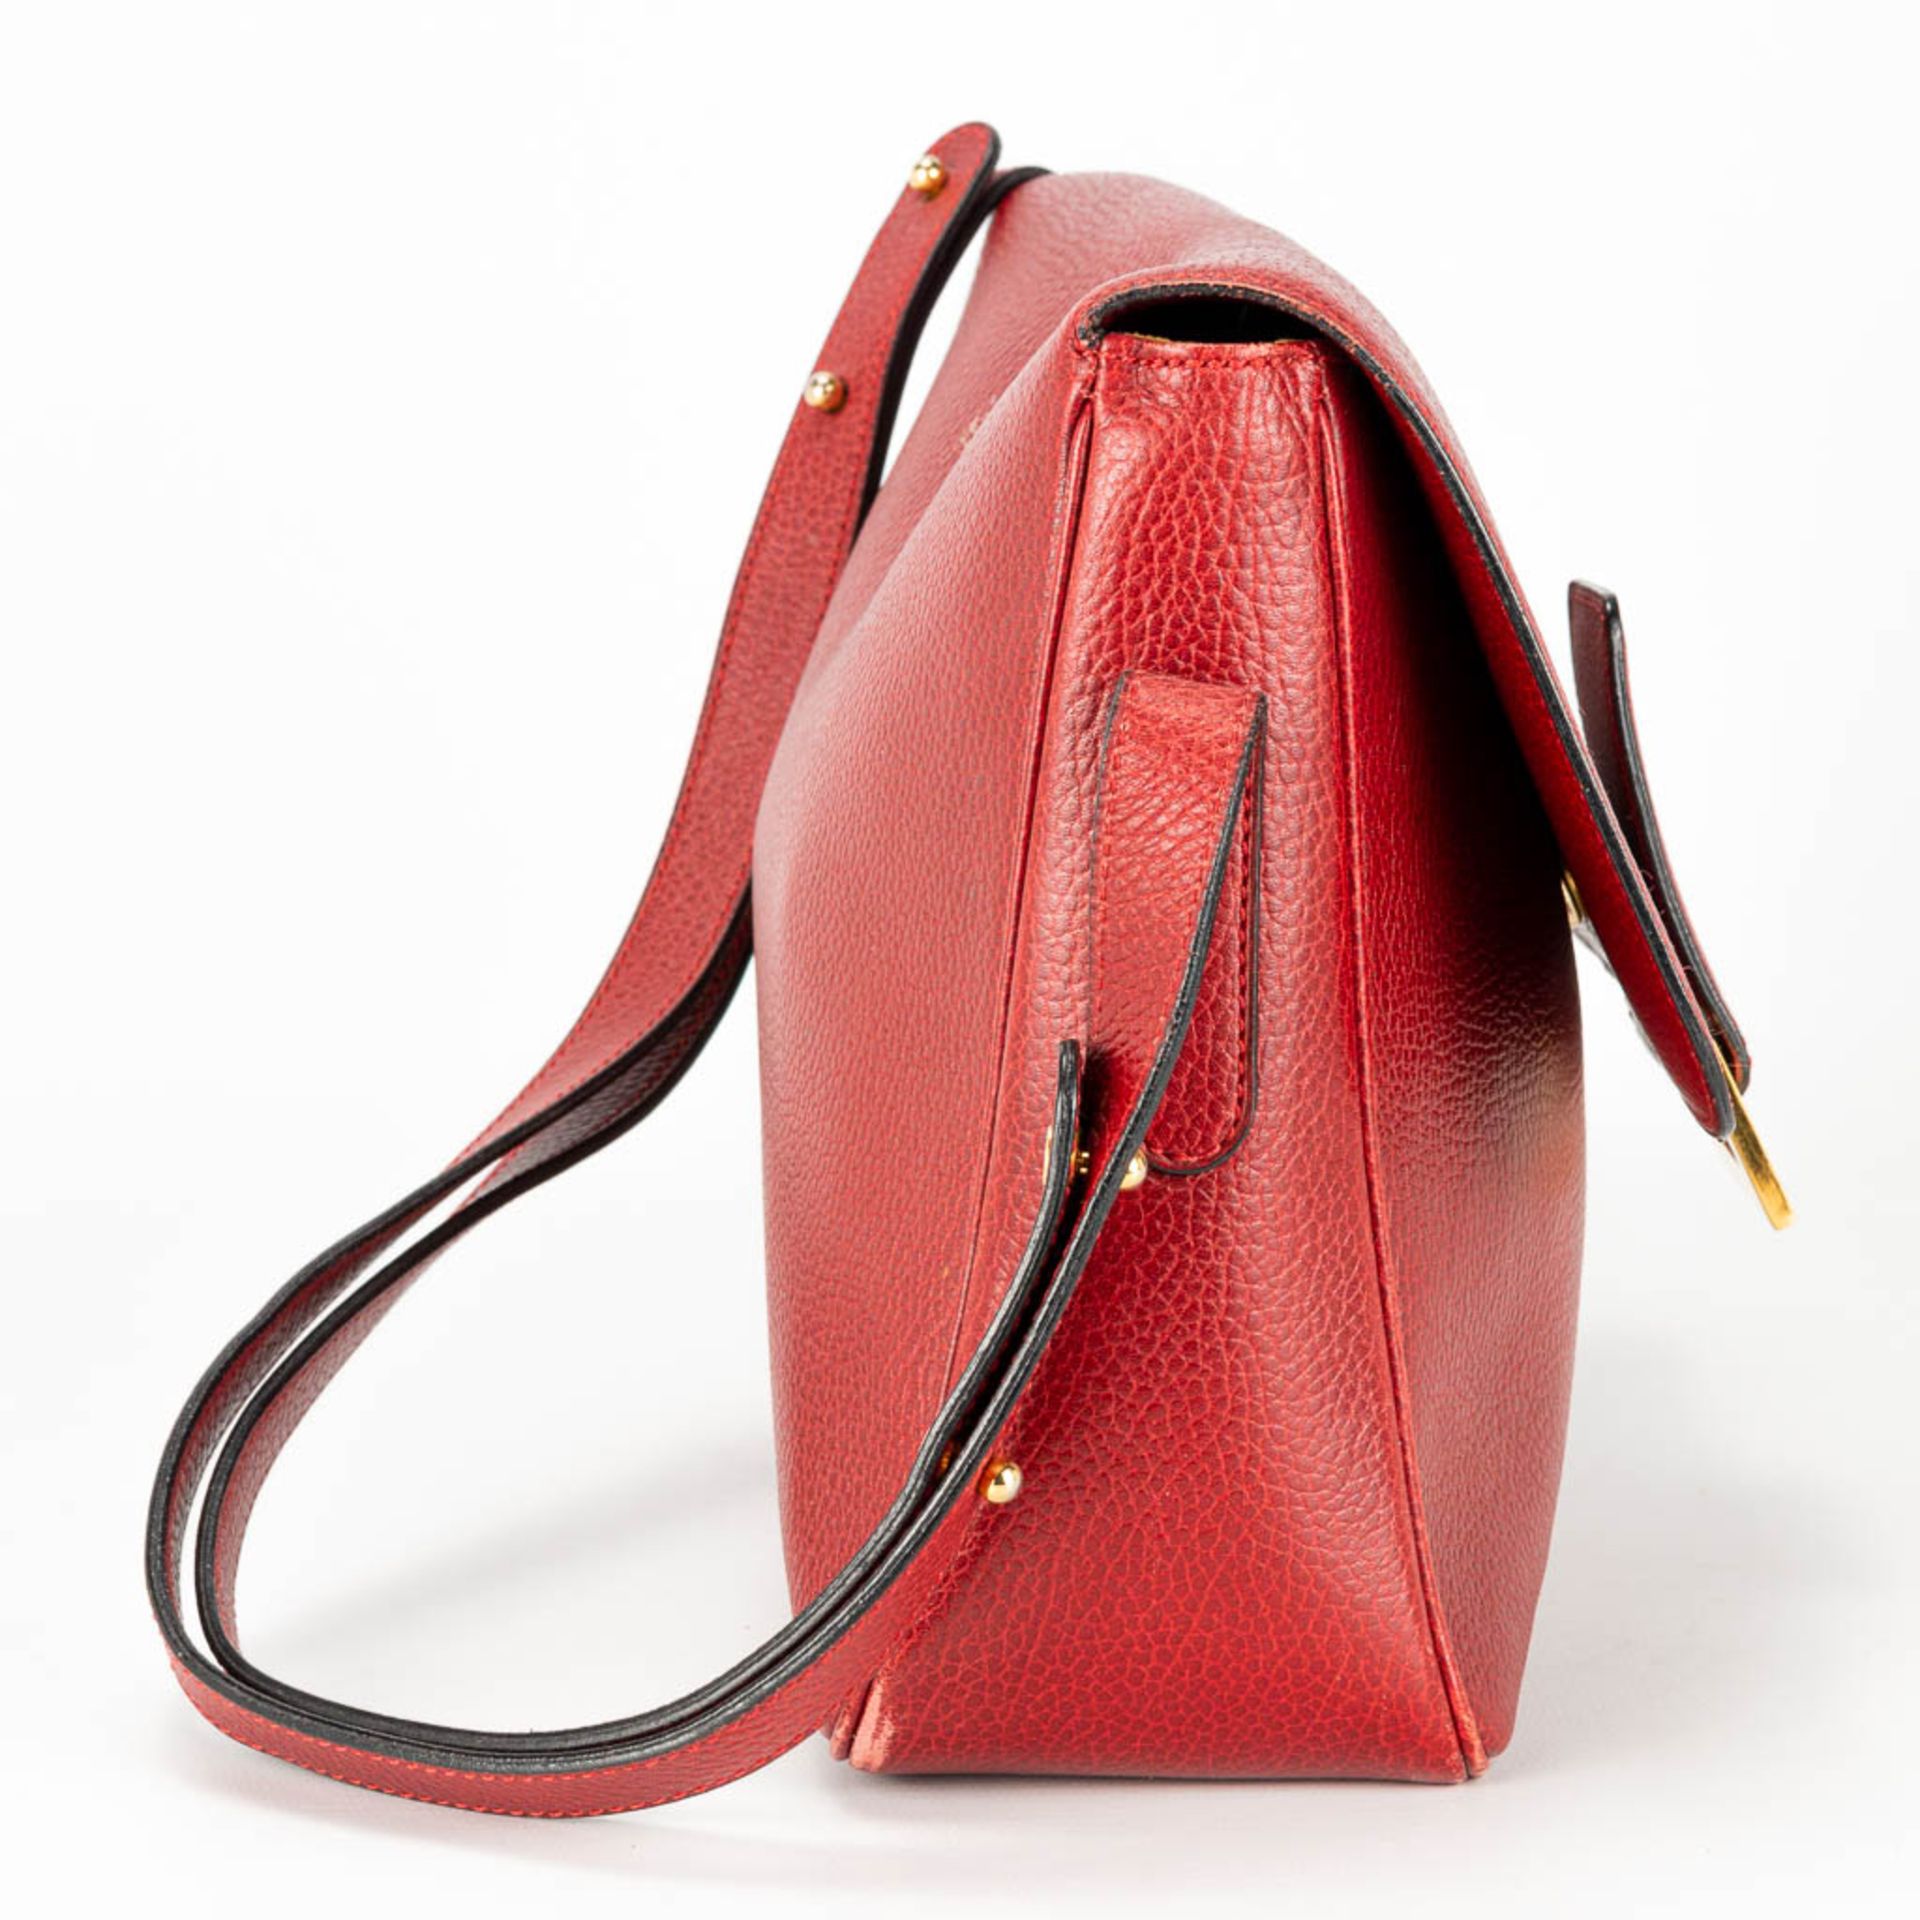 A purse made of red leather and marked Delvaux. - Image 2 of 16